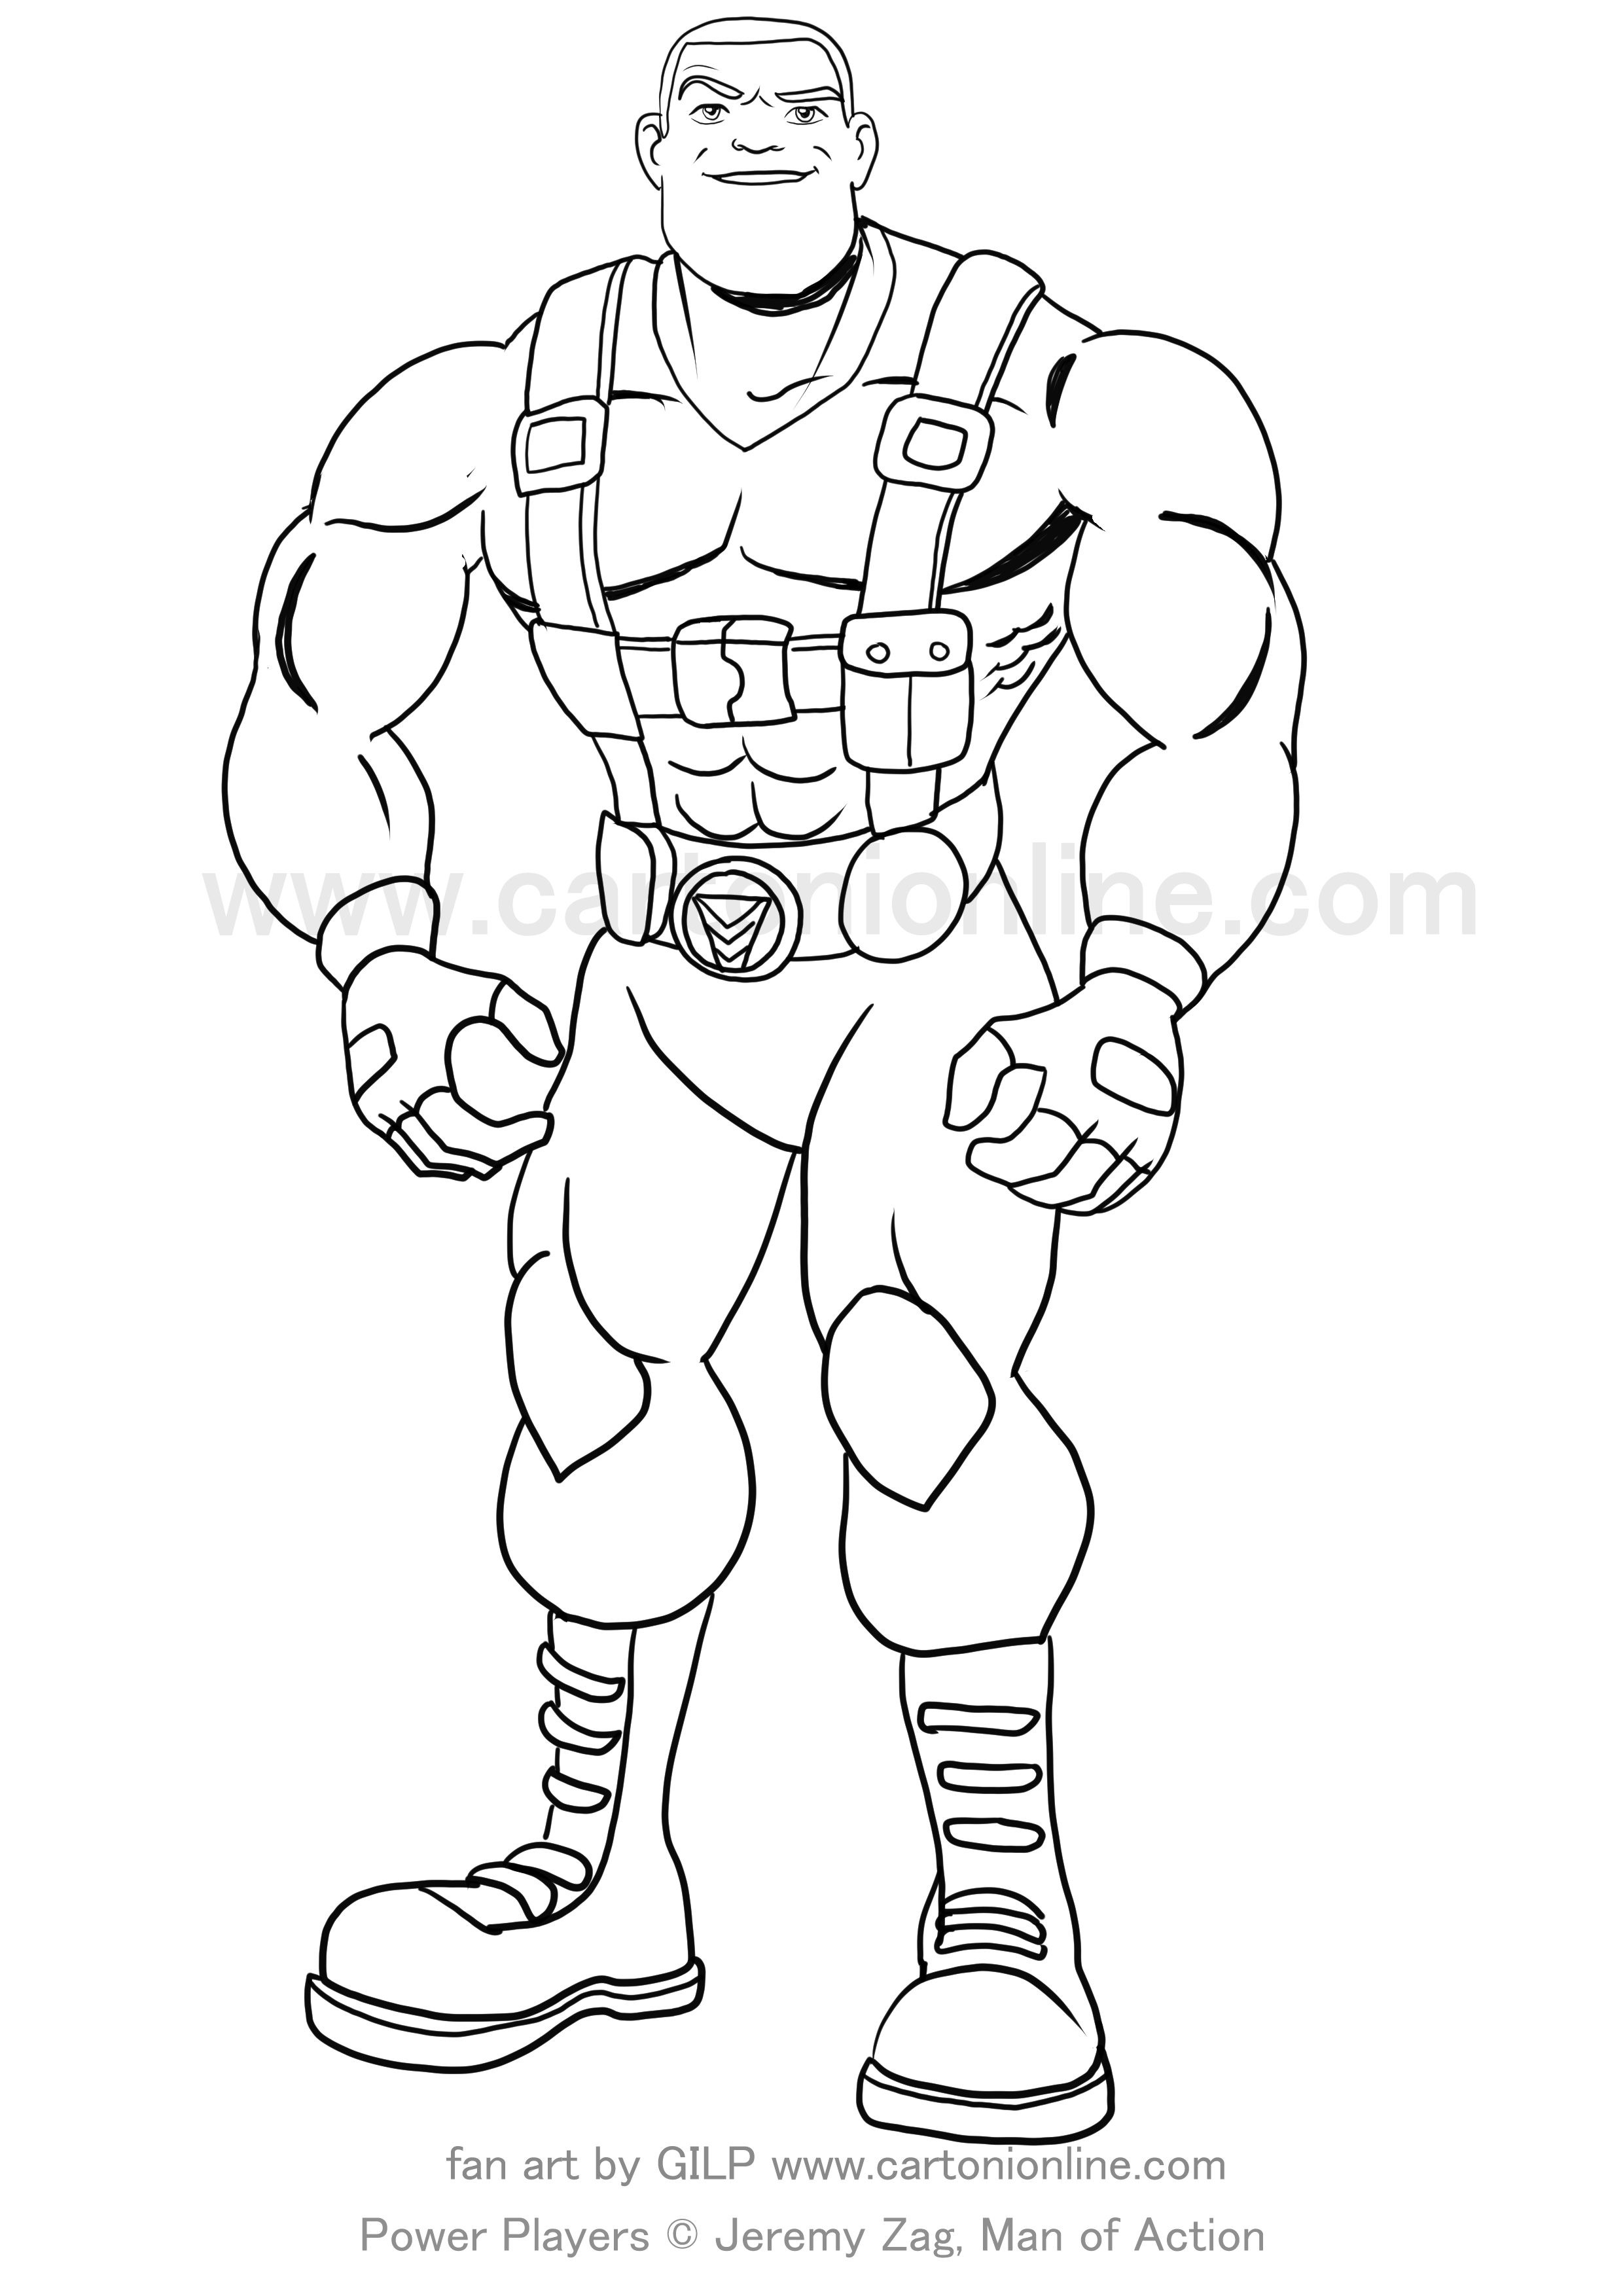 Sarge Charge from Power Players coloring pages to print and coloring